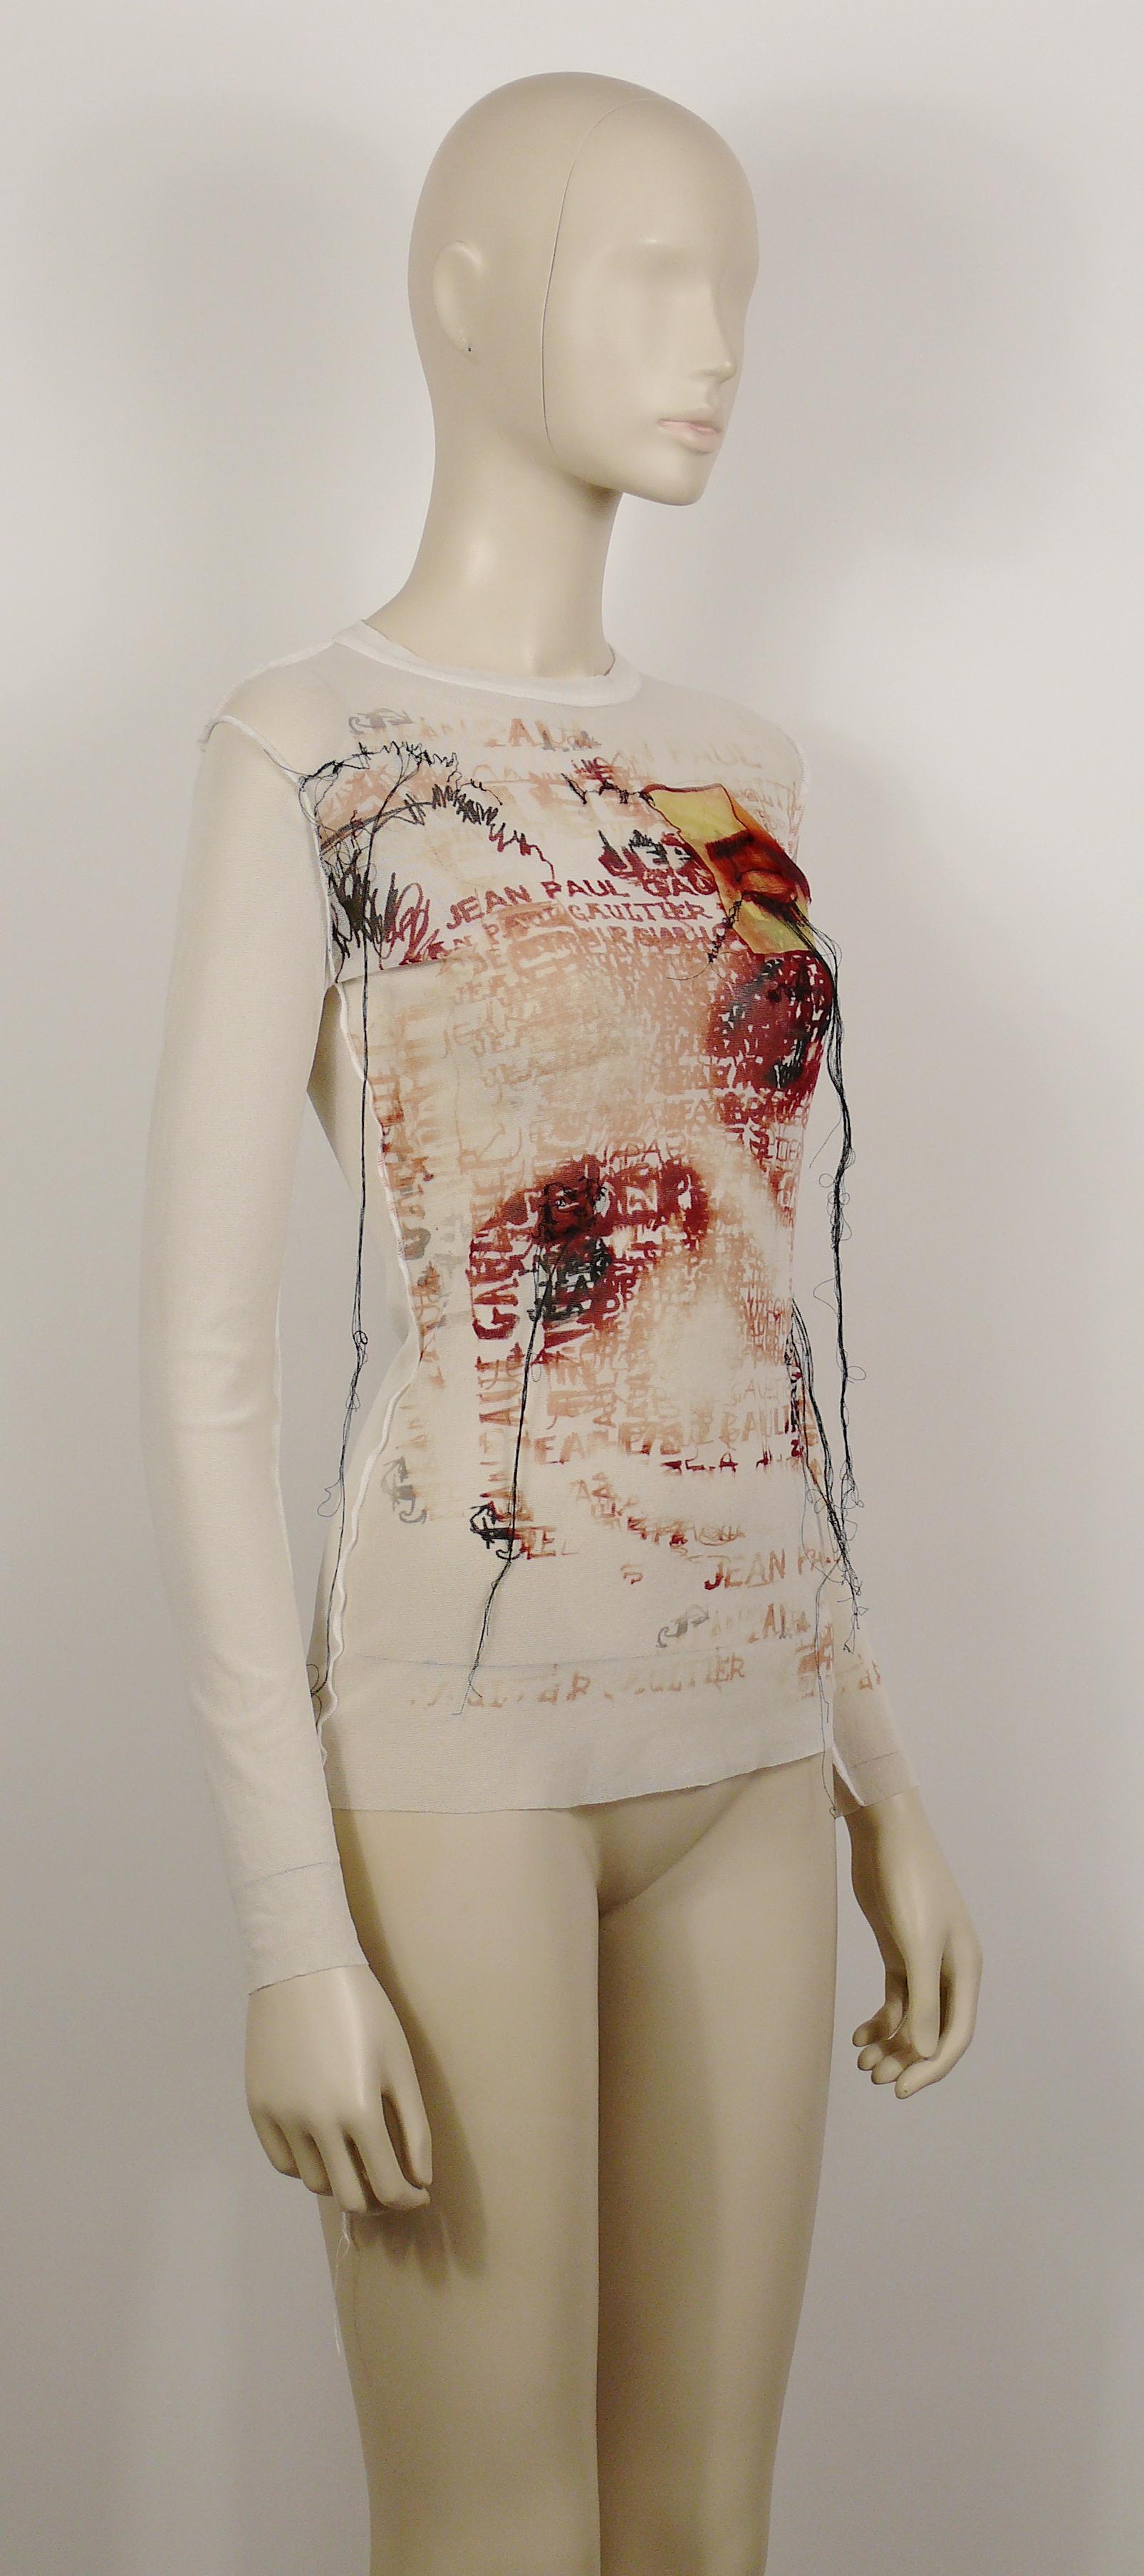 JEAN PAUL GAULTIER Maille Femme white sheer mesh top featuring and eye applique, an optical illusition portrait, JEAN PAUL GAULTIER wording and threads.

Label reads JEAN PAUL GAULTIER Maille Femme Made in Italy.

Composition tag reads : 100%